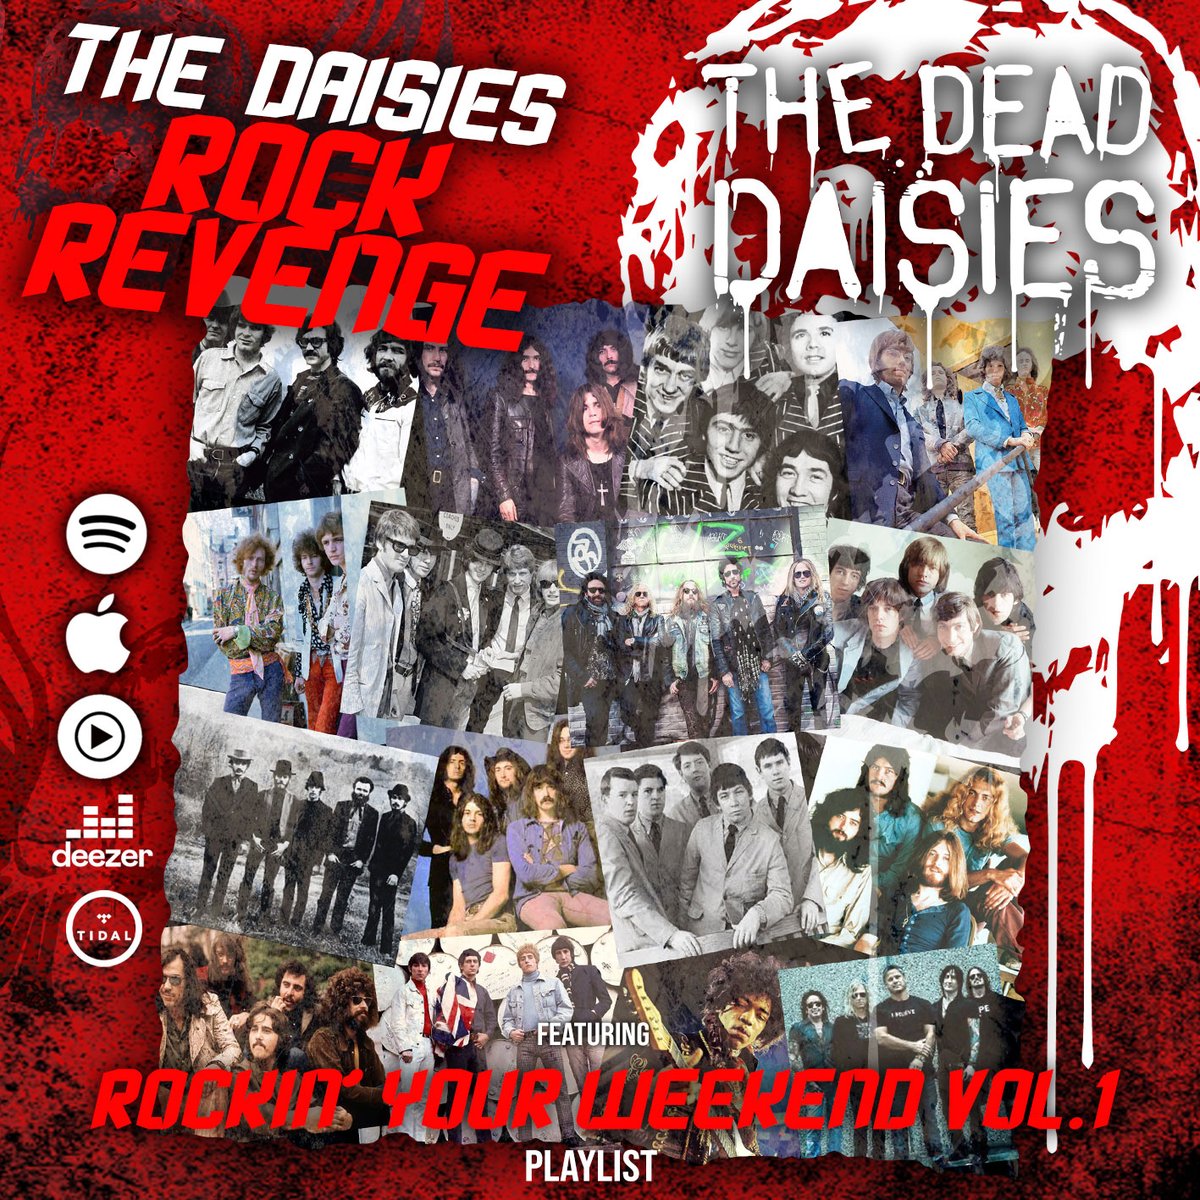 It’s time for a Rockin' Weekend!!🤘🚀🤘 We put this playlist together for you to enjoy!🏋️‍♂️😎 Crank it up & stream these classic 60’s hits!⚡🚀⚡ thedeaddaisies.com/daisies-rock-r… #TheDeadDaisies #TheDaisiesRockRevenge #RockinYourWeekend #Playlist #Spotify #AppleMusic #YouTubeMusic #Deezer…